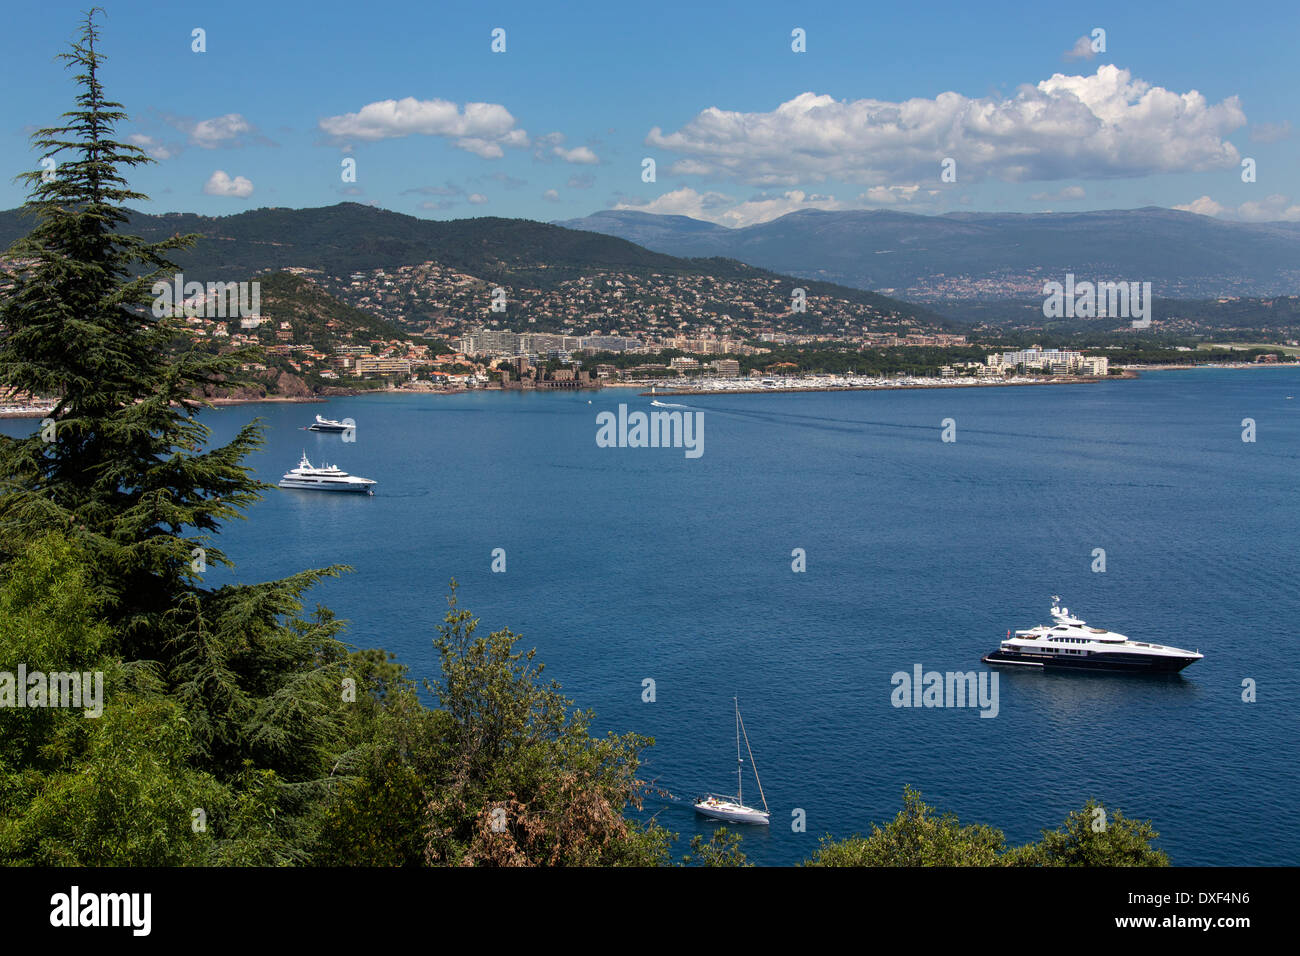 The Corniche de l'Esteral on the French Riviera on the Cote d'Azur in the South of France. Stock Photo